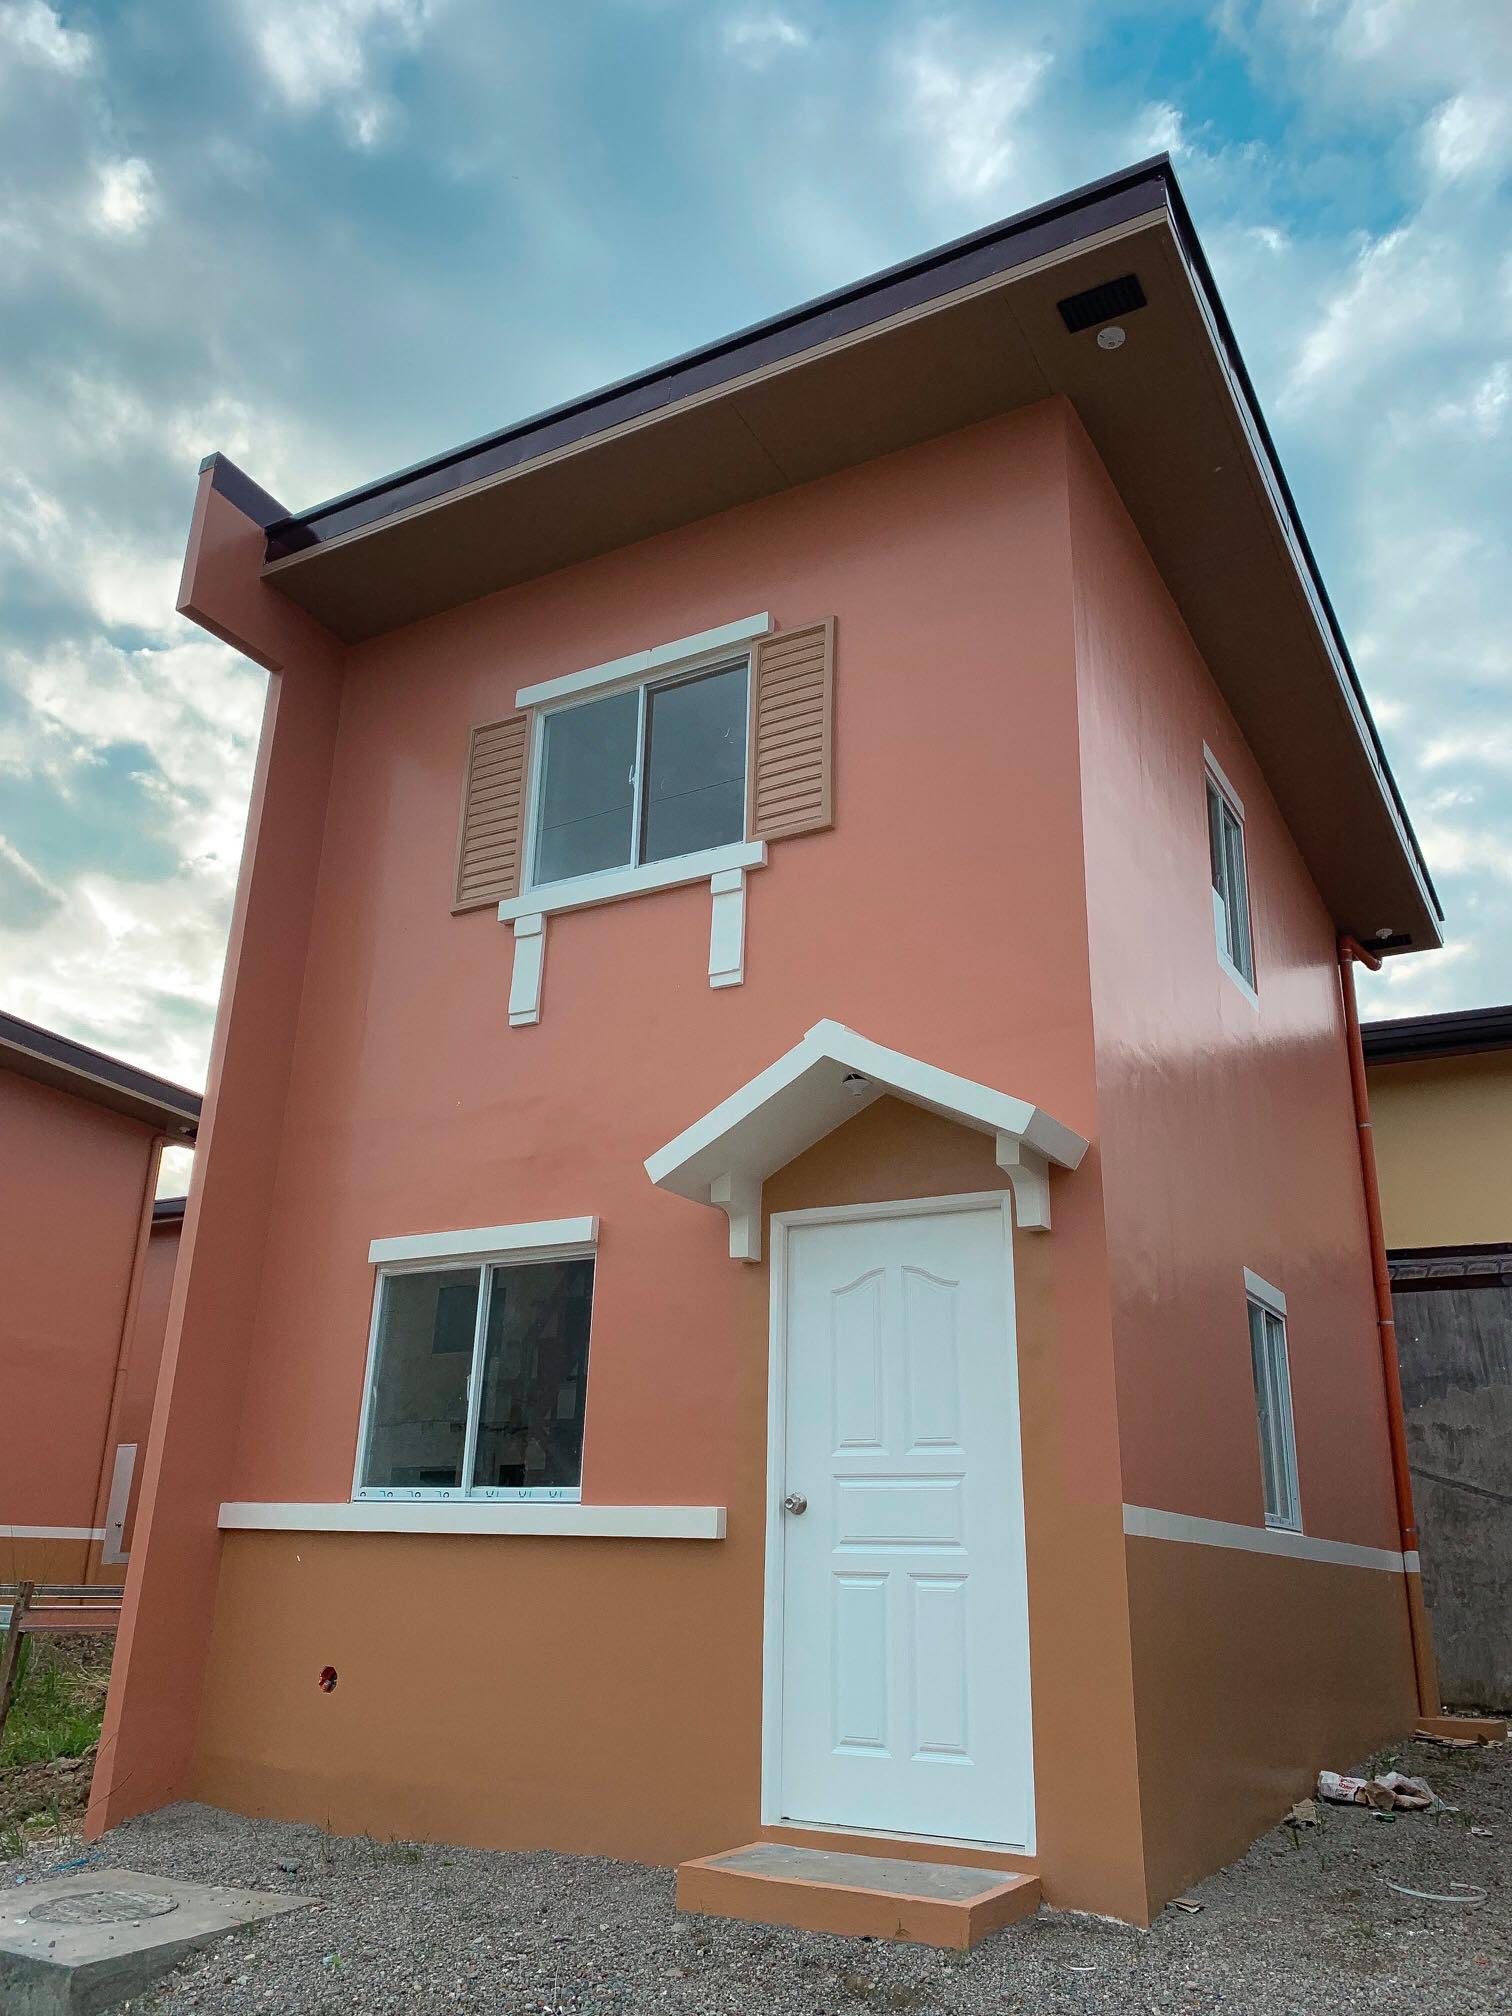 AFFORDABLE HOUSE AND LOT FOR SALE IN GENERAL SANTOS CITY